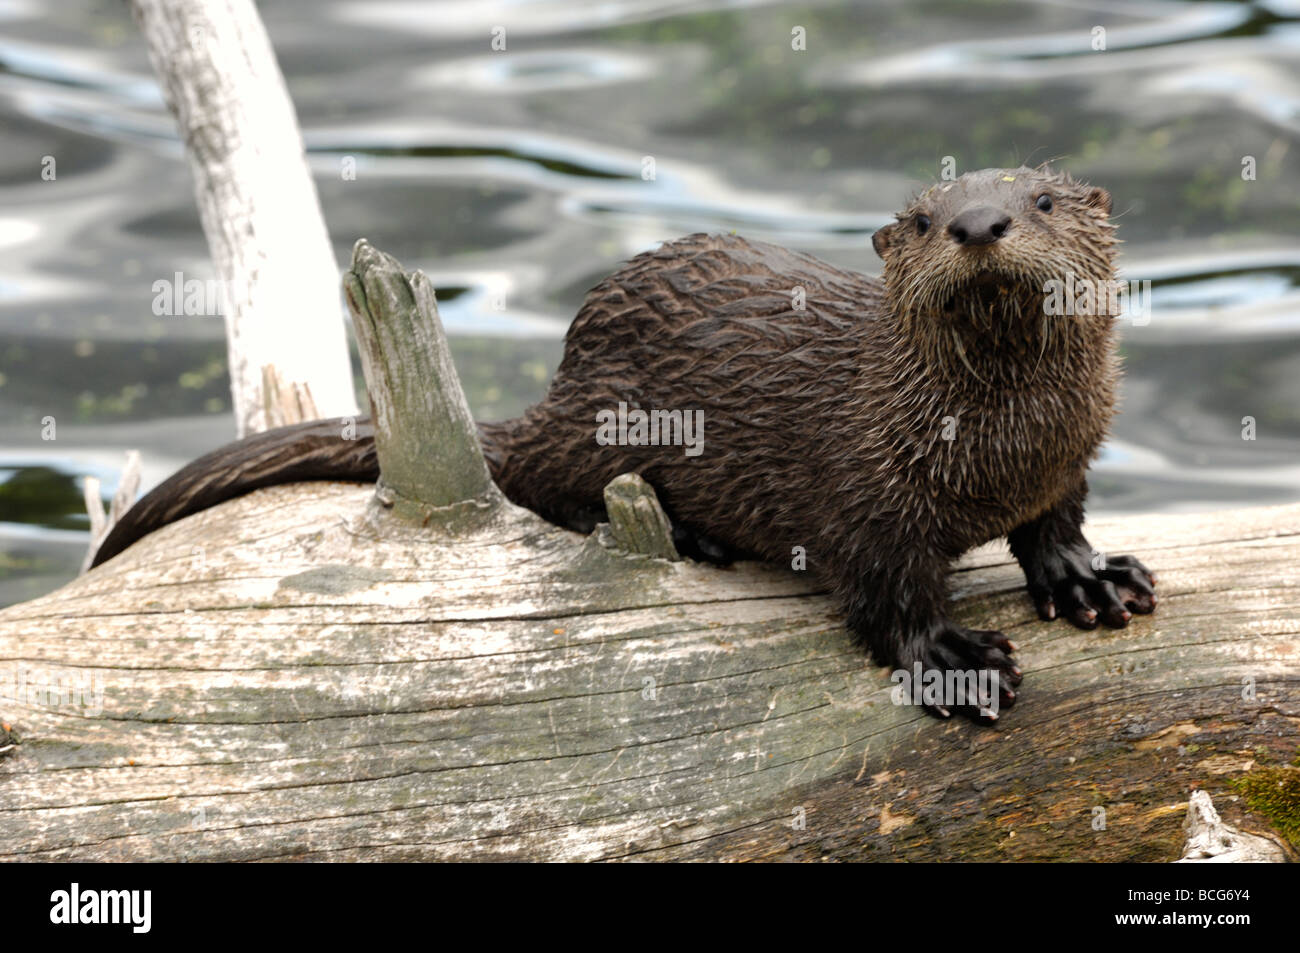 Stock photo of a river otter pup sitting on a log in a lake, Yellowstone National Park, Montana, 2009. Stock Photo